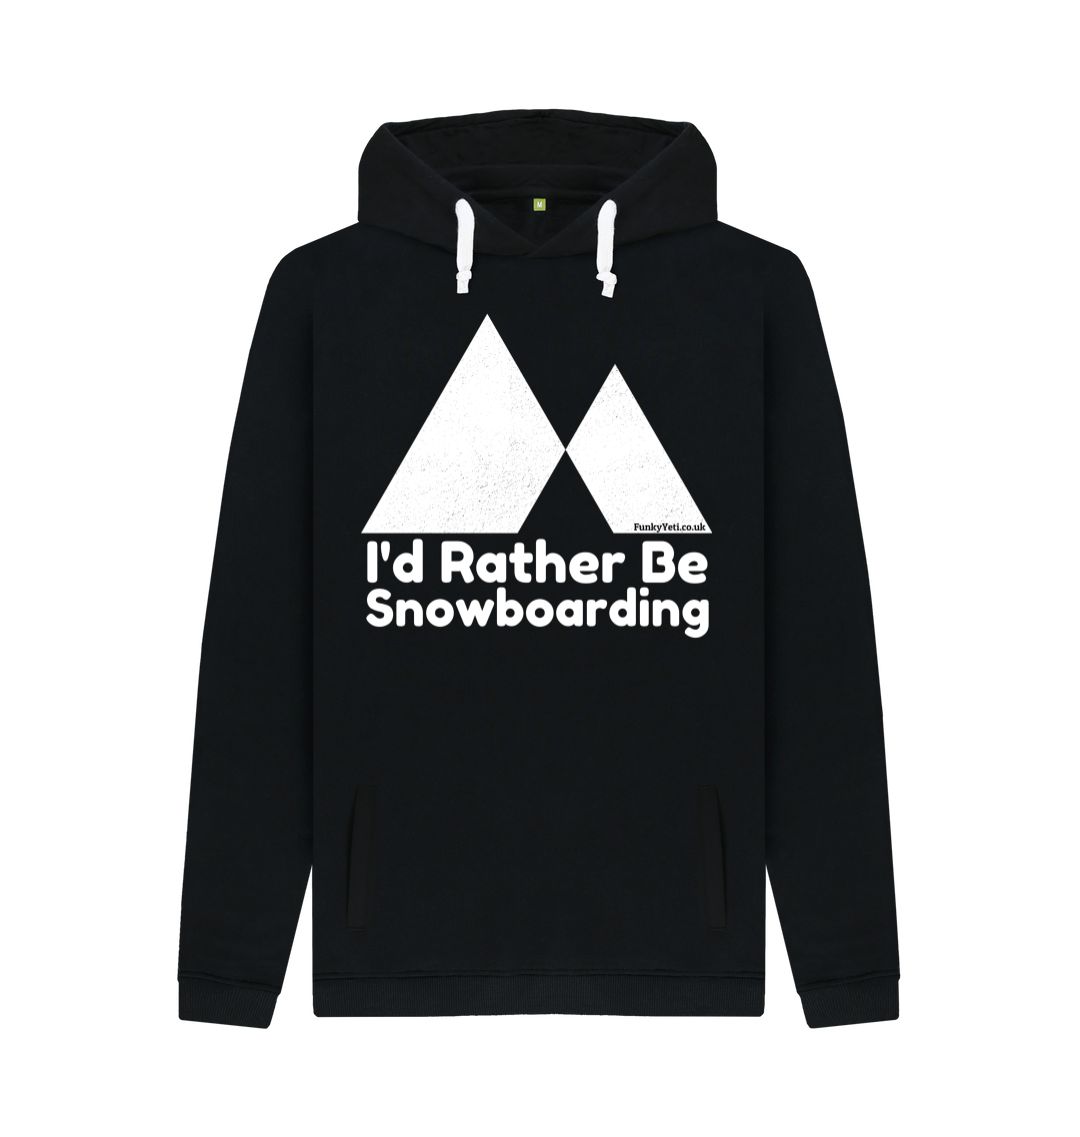 Black Funky Yeti Men's Pullover Hoodie - I'd Rather Be Snowboarding